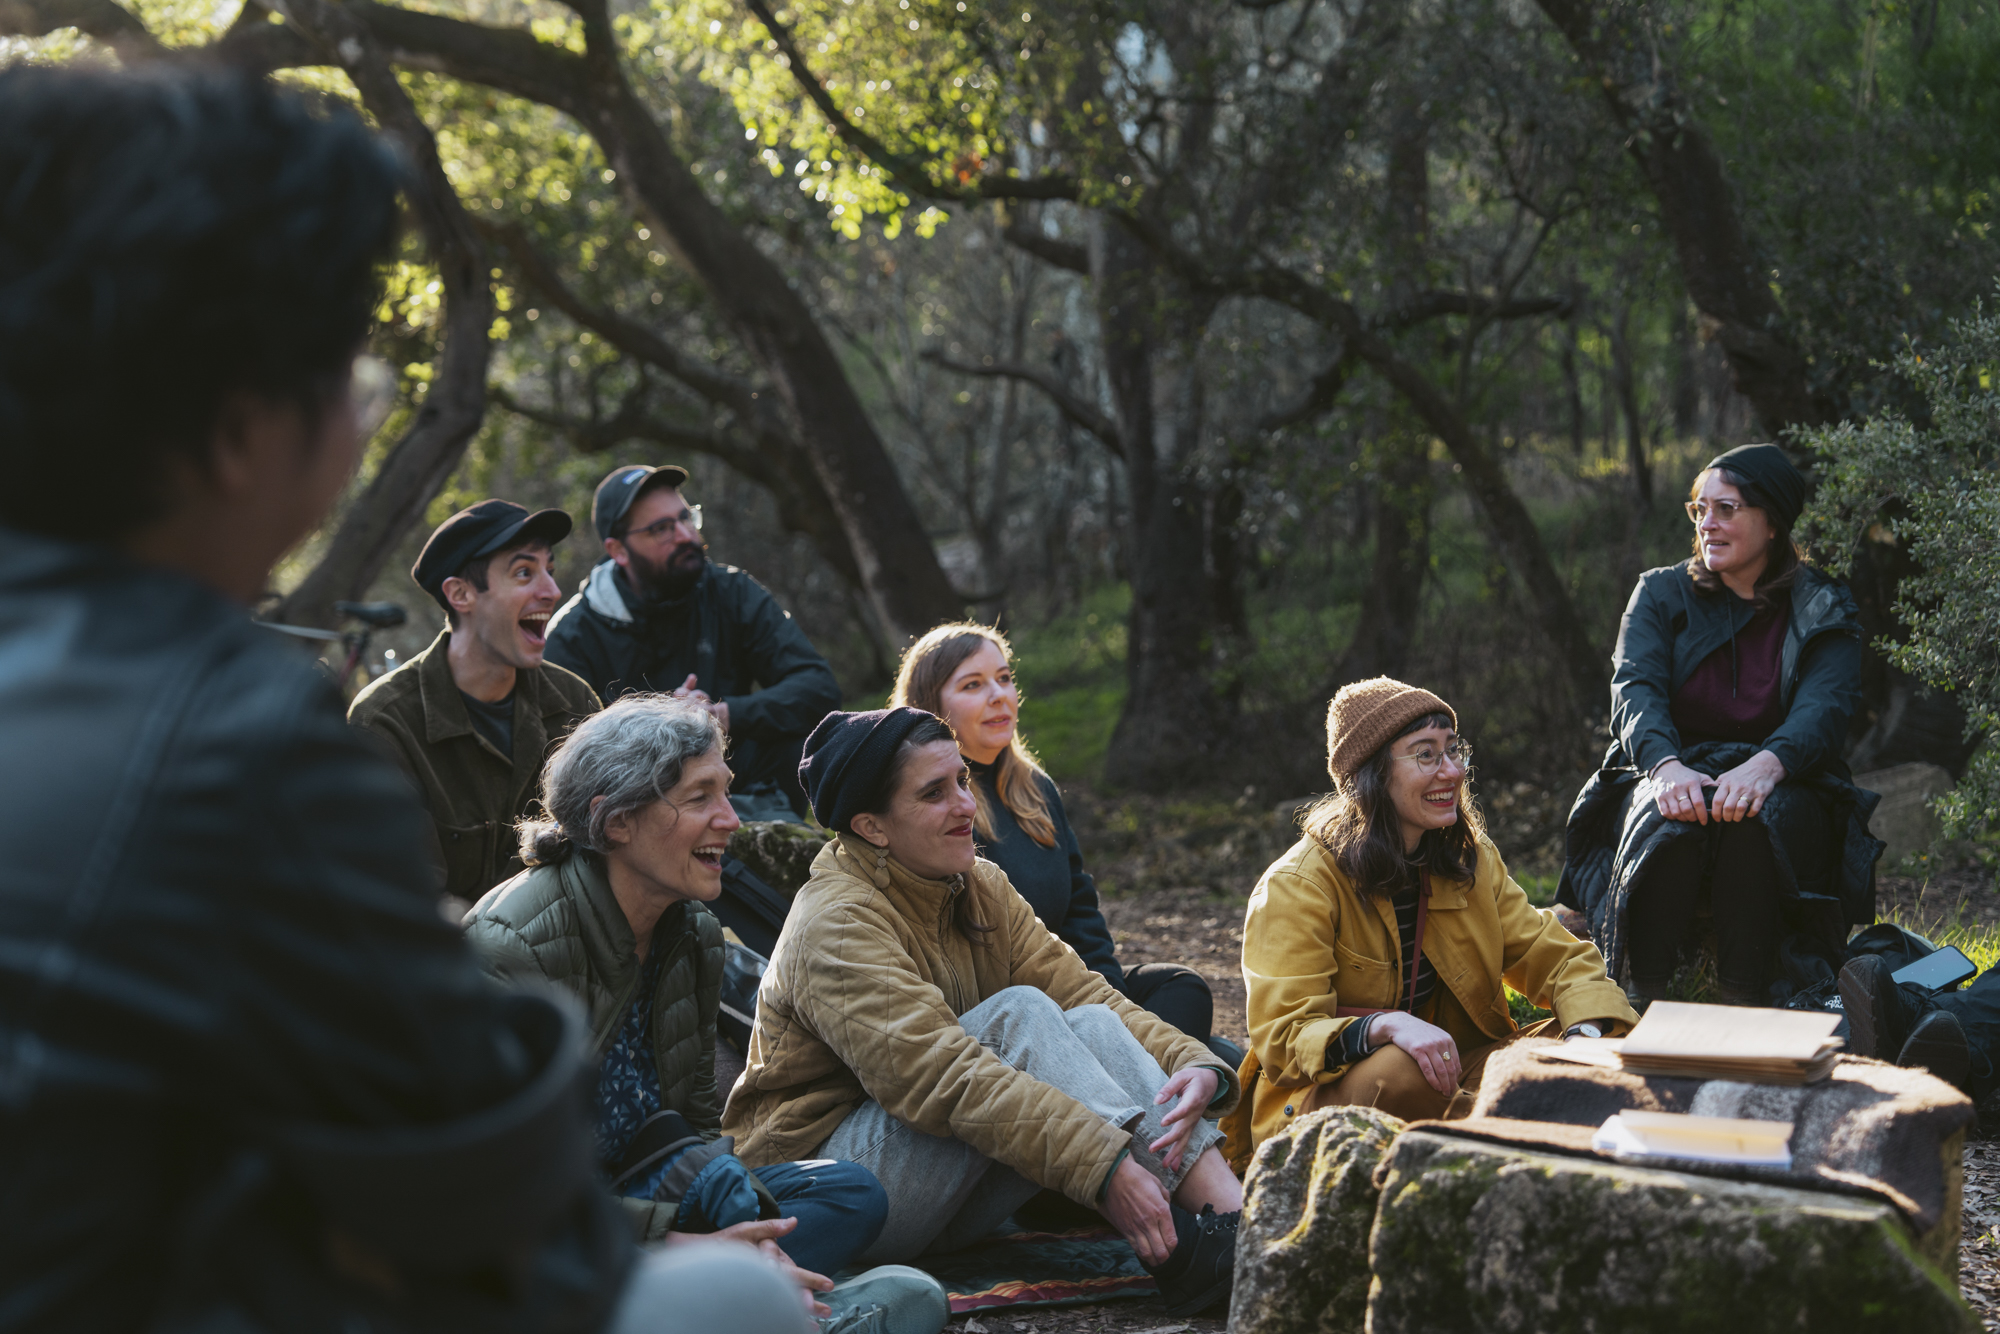 A group of people sit together smiling in a wooded area.